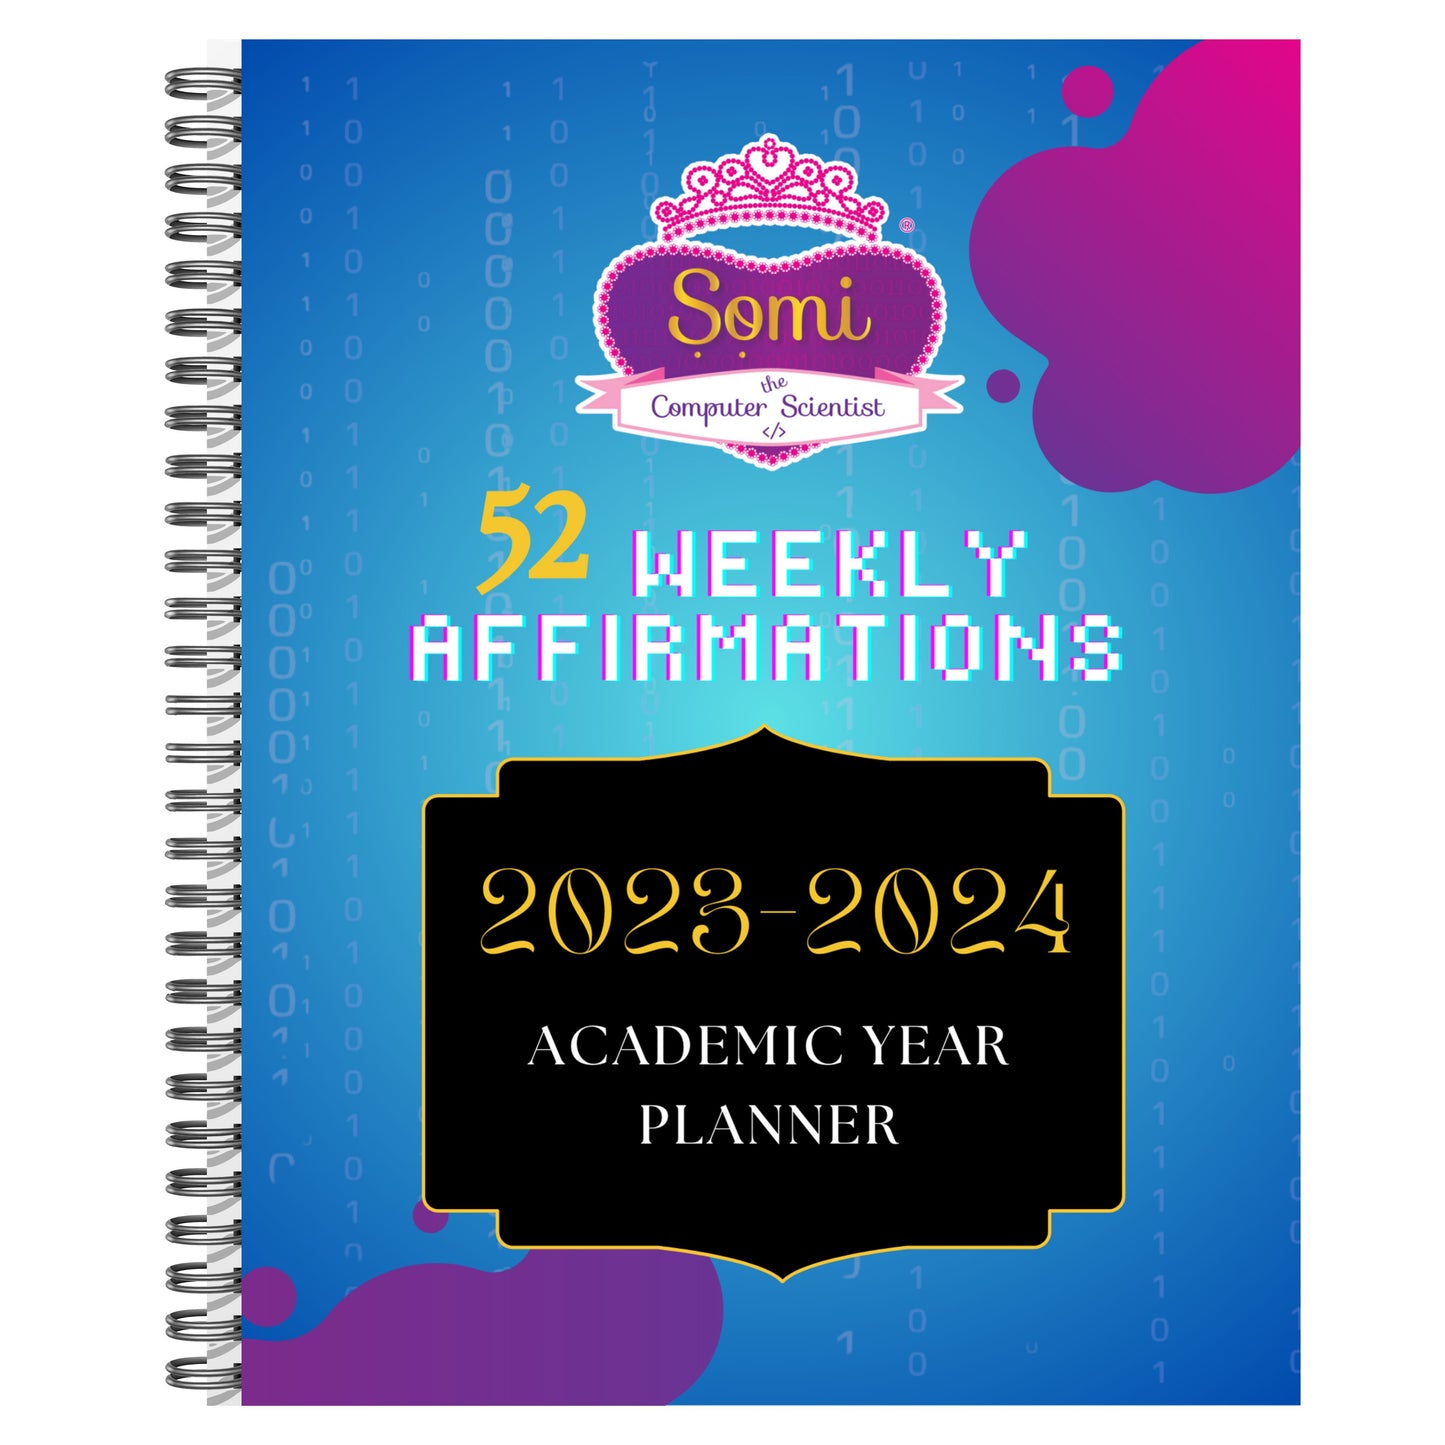 Somi, the Computer Scientist 2023-2024 Academic Planner for Pre-teen, Teen, College Student and Teachers